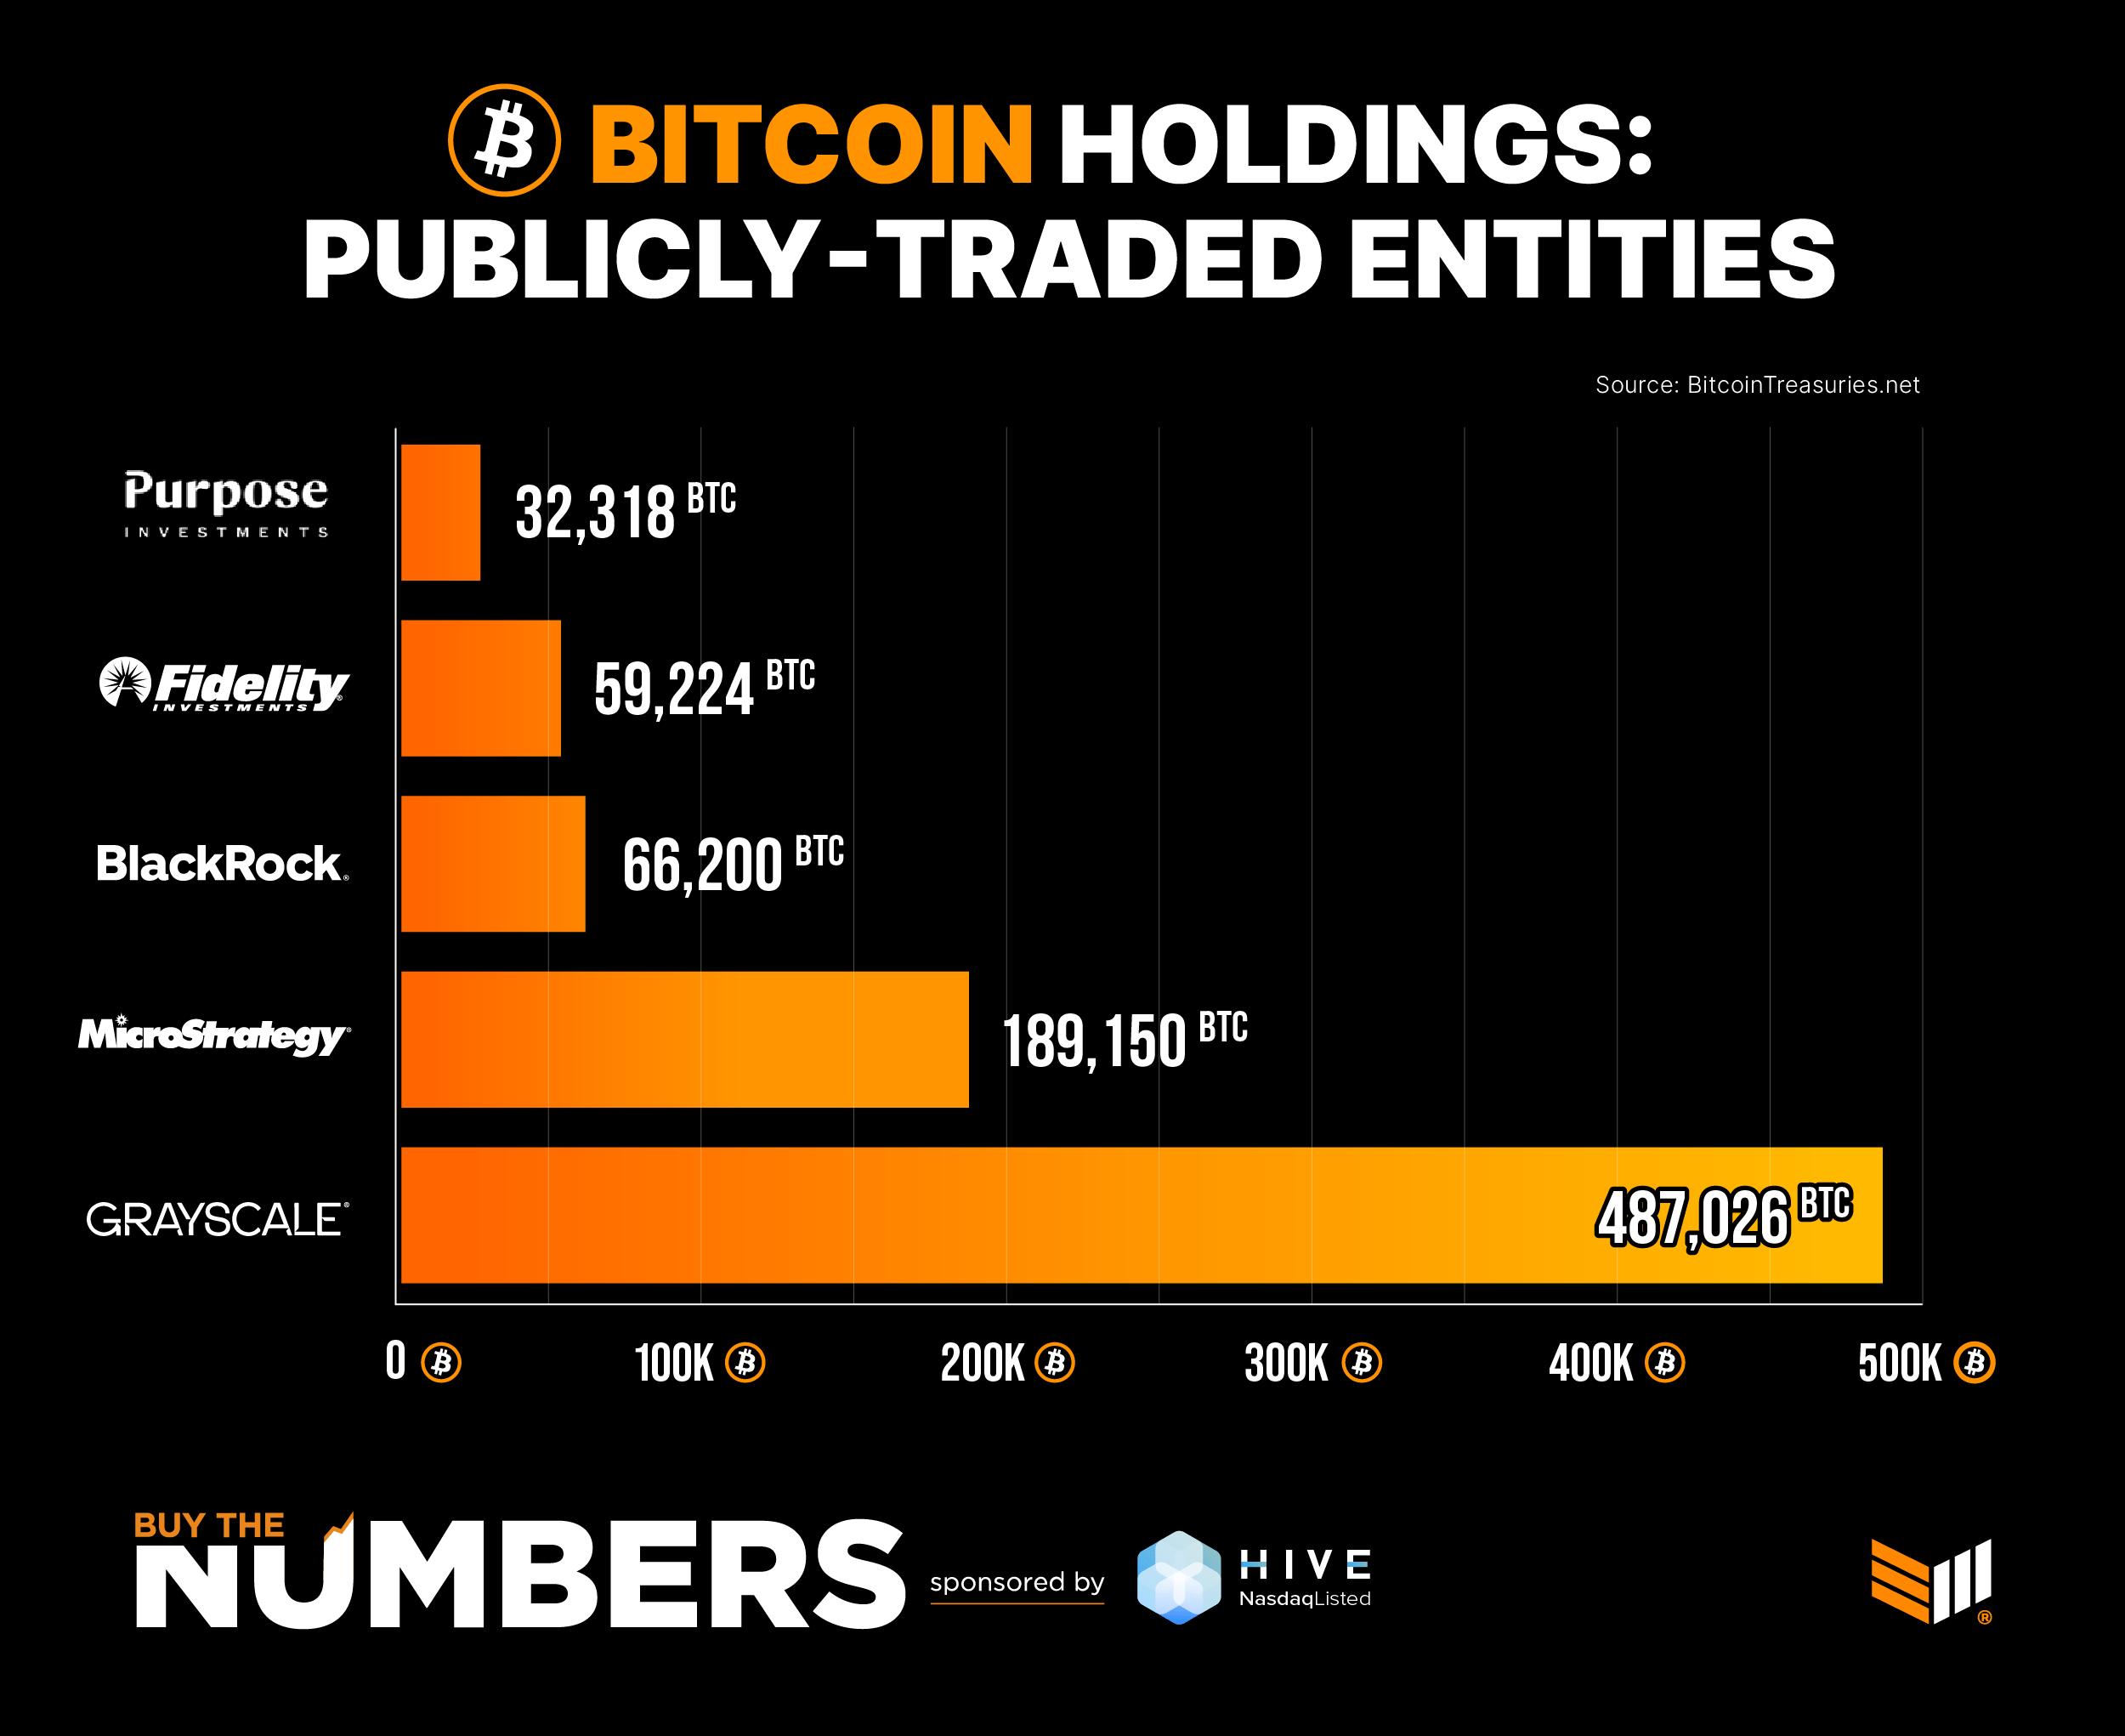 CRYPTONEWSBYTES.COM GFSSFhiWgAAOKkv Unveiling the Top 5 Largest Publicly-Traded Bitcoin Holders in the Crypto Realm  